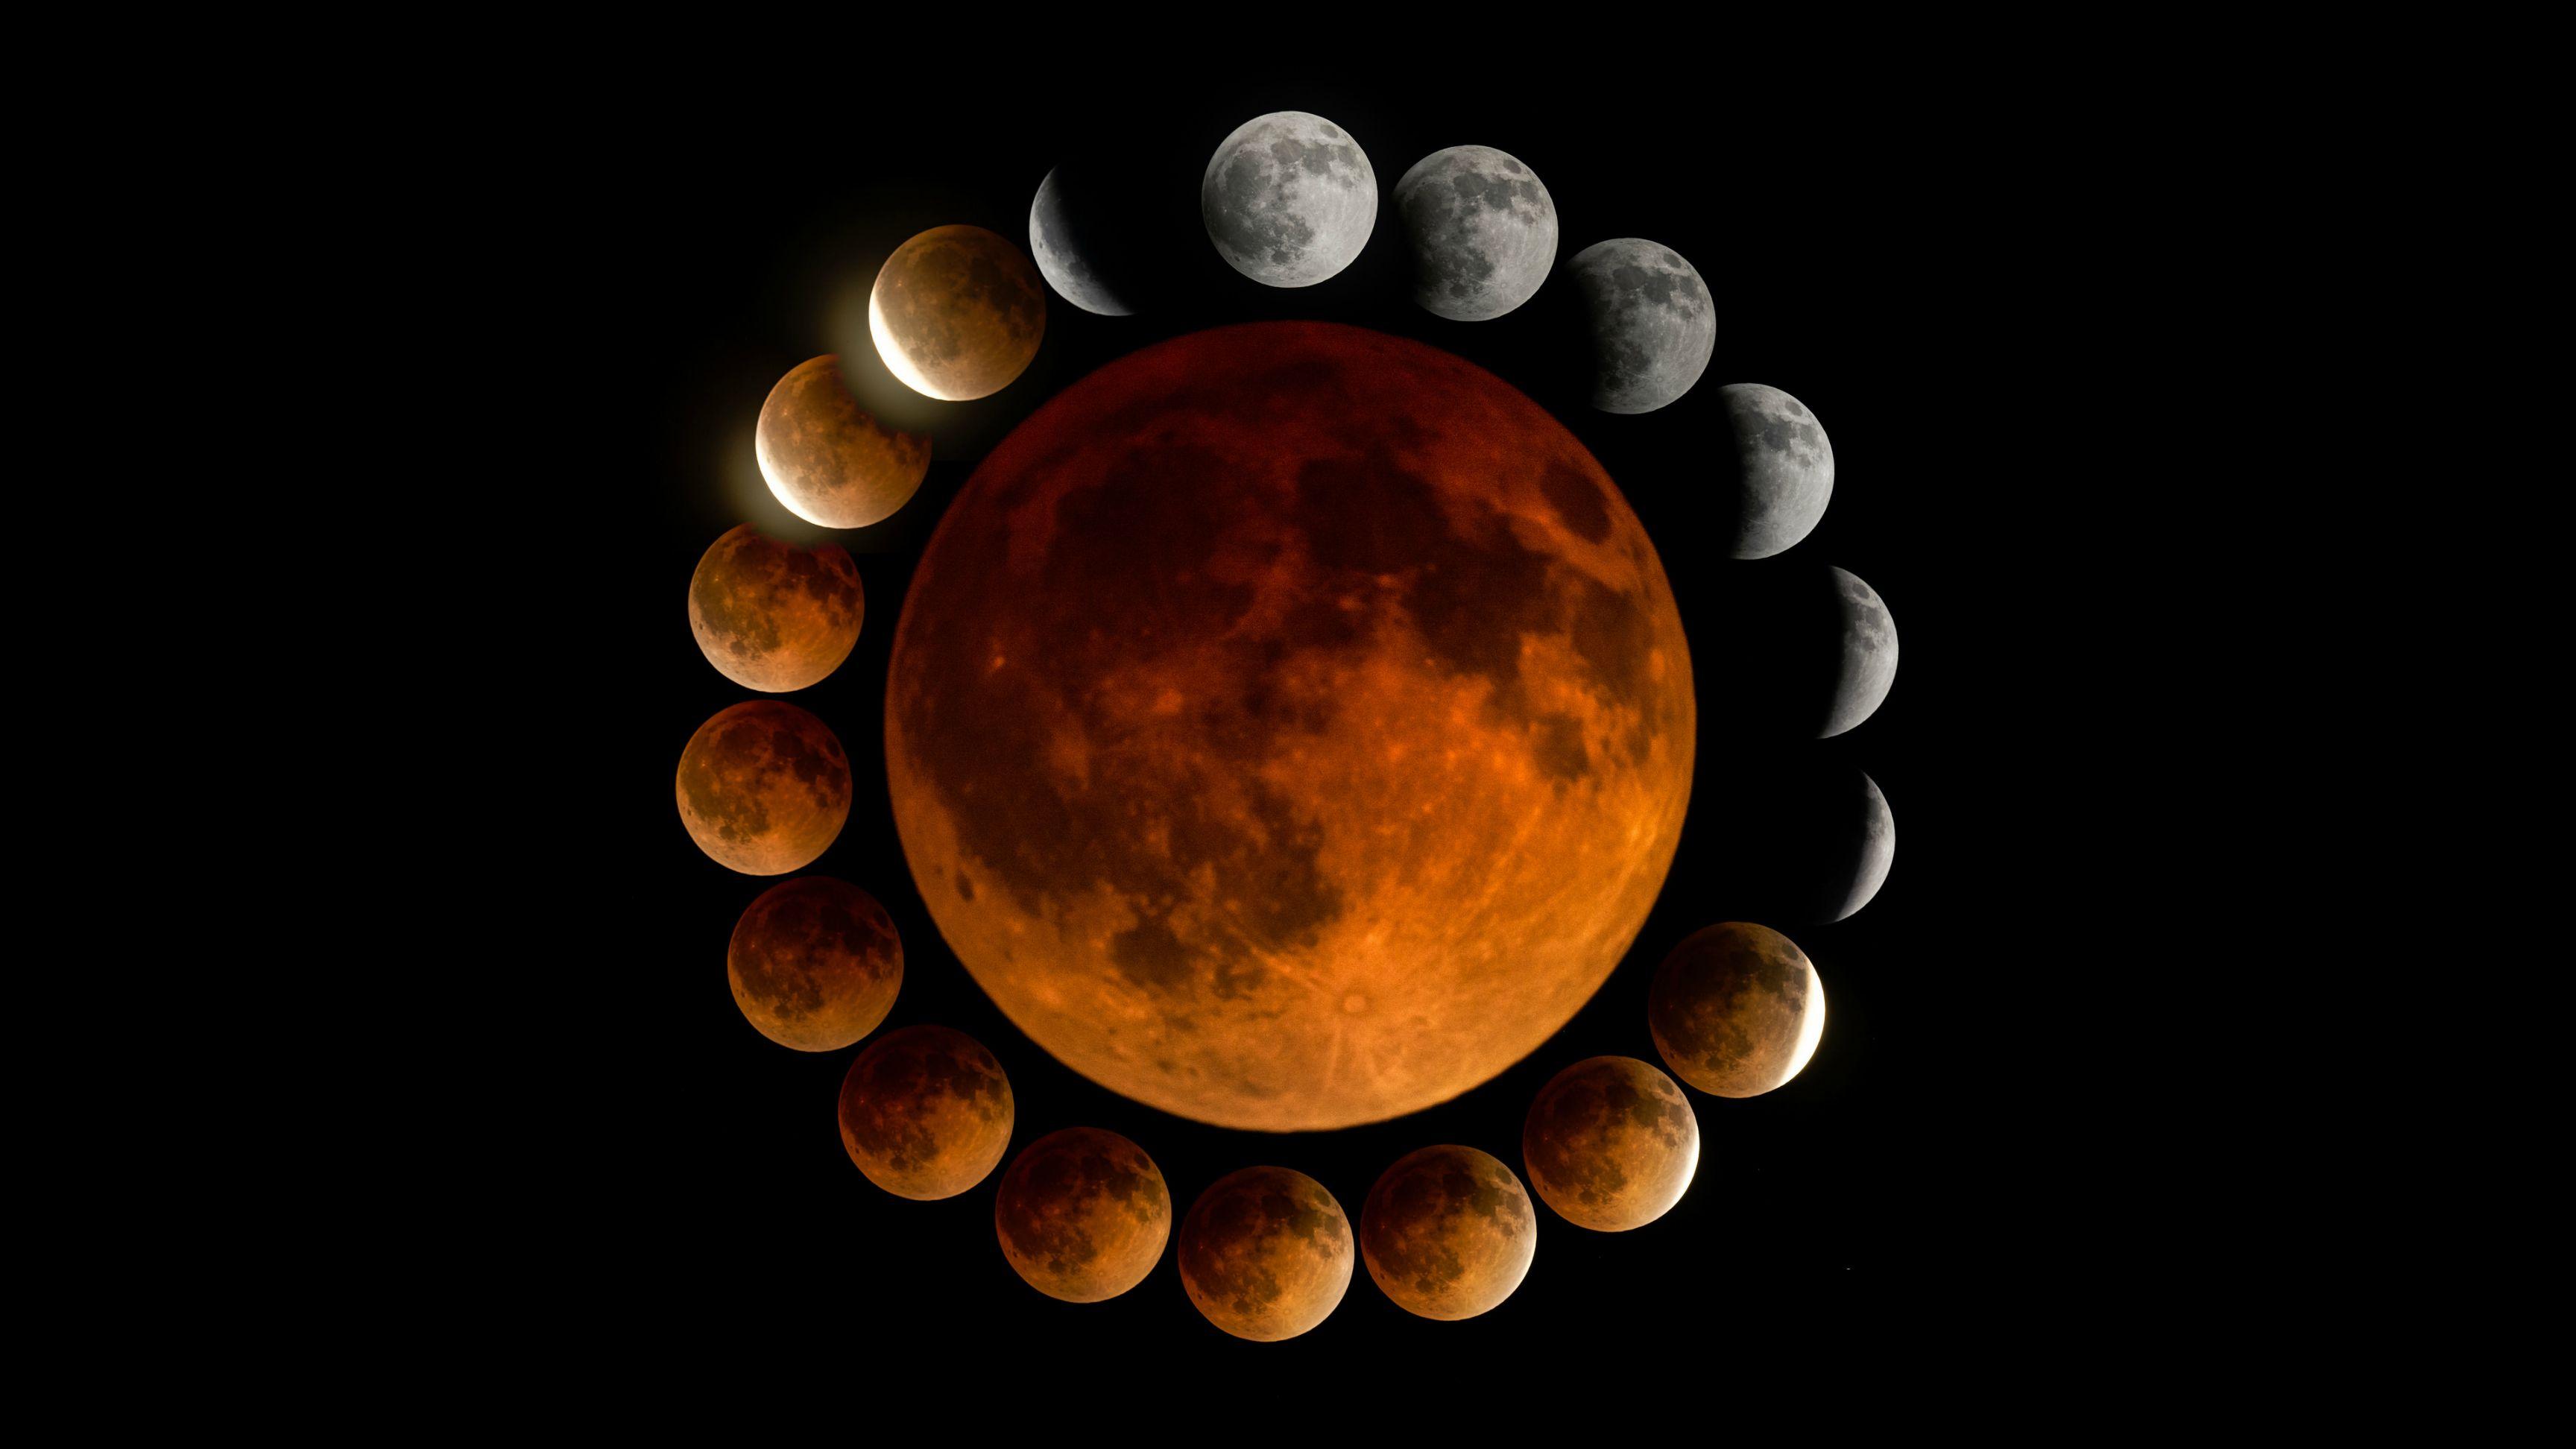 Someone made a pic of the blood moon a few weeks ago, I made a